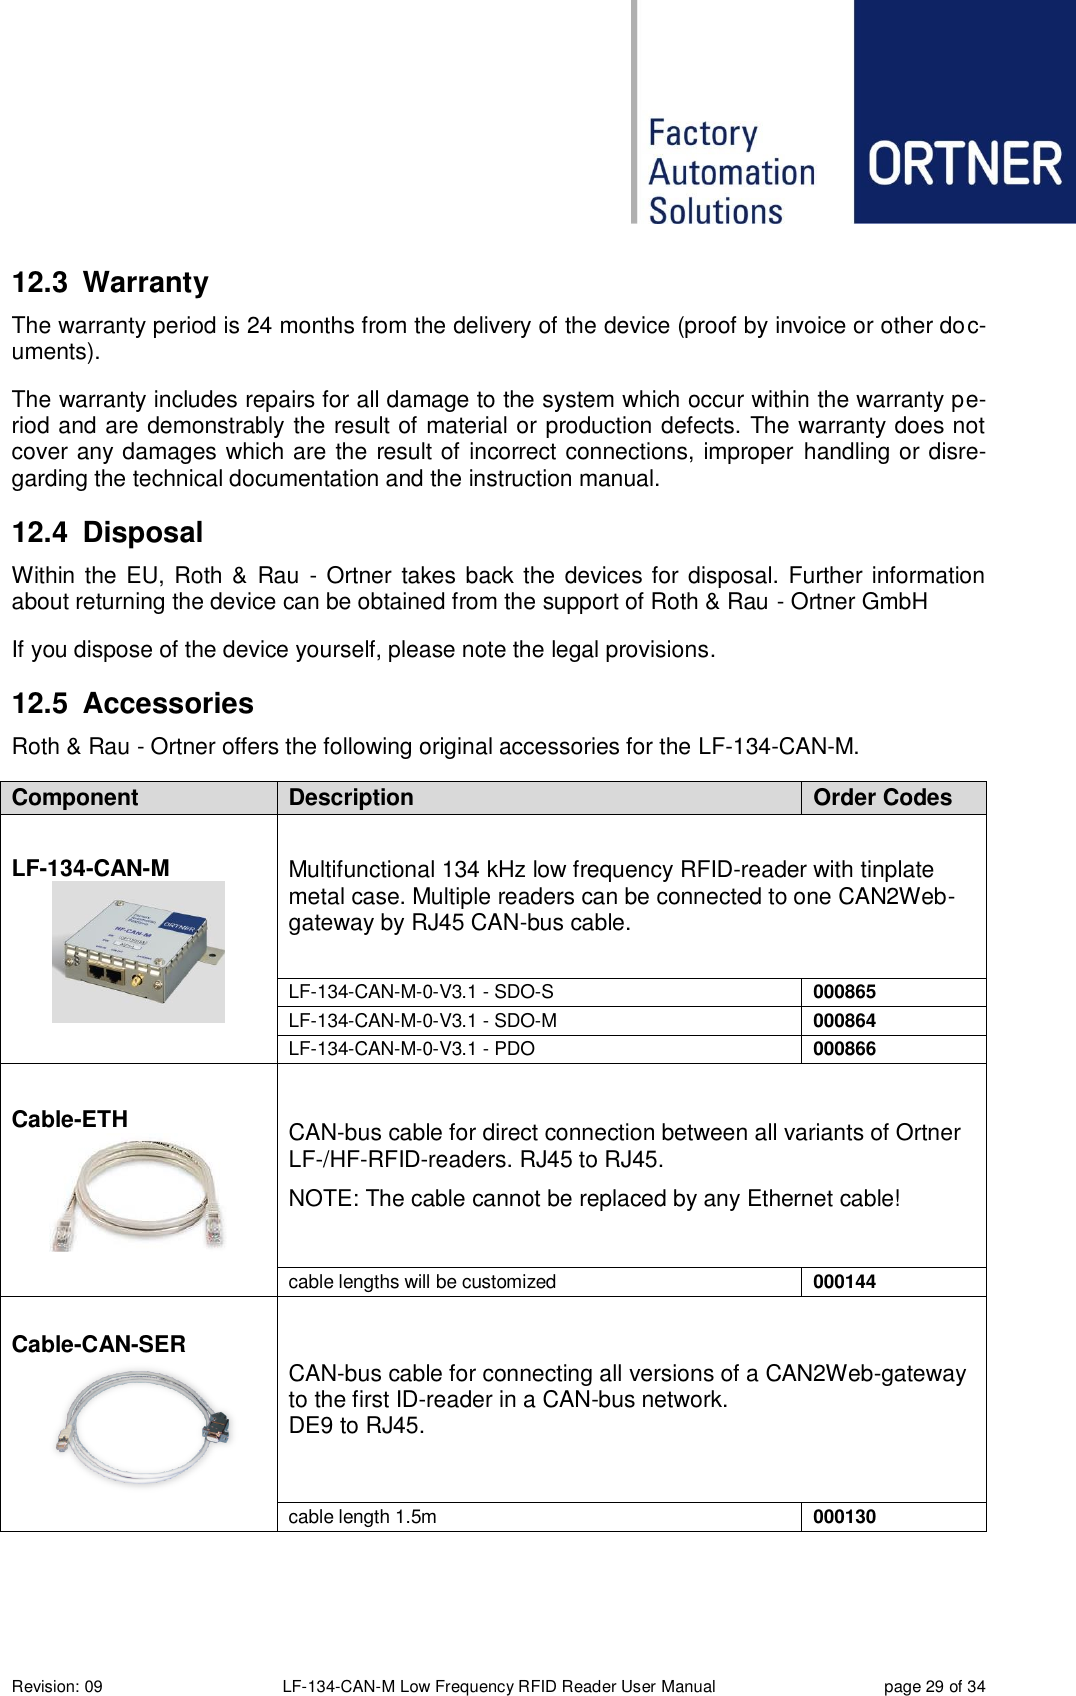  Revision: 09 LF-134-CAN-M Low Frequency RFID Reader User Manual  page 29 of 34 12.3  Warranty The warranty period is 24 months from the delivery of the device (proof by invoice or other doc-uments). The warranty includes repairs for all damage to the system which occur within the warranty pe-riod and are demonstrably the result of material or production defects. The warranty does not cover any damages which are the result of incorrect connections, improper handling or disre-garding the technical documentation and the instruction manual. 12.4  Disposal Within the EU, Roth &amp; Rau  - Ortner  takes back the devices for disposal. Further  information about returning the device can be obtained from the support of Roth &amp; Rau - Ortner GmbH  If you dispose of the device yourself, please note the legal provisions. 12.5  Accessories Roth &amp; Rau - Ortner offers the following original accessories for the LF-134-CAN-M.  Component Description Order Codes LF-134-CAN-M  Multifunctional 134 kHz low frequency RFID-reader with tinplate metal case. Multiple readers can be connected to one CAN2Web-gateway by RJ45 CAN-bus cable. LF-134-CAN-M-0-V3.1 - SDO-S 000865 LF-134-CAN-M-0-V3.1 - SDO-M 000864 LF-134-CAN-M-0-V3.1 - PDO 000866 Cable-ETH  CAN-bus cable for direct connection between all variants of Ortner LF-/HF-RFID-readers. RJ45 to RJ45. NOTE: The cable cannot be replaced by any Ethernet cable! cable lengths will be customized 000144 Cable-CAN-SER  CAN-bus cable for connecting all versions of a CAN2Web-gateway to the first ID-reader in a CAN-bus network. DE9 to RJ45. cable length 1.5m 000130 